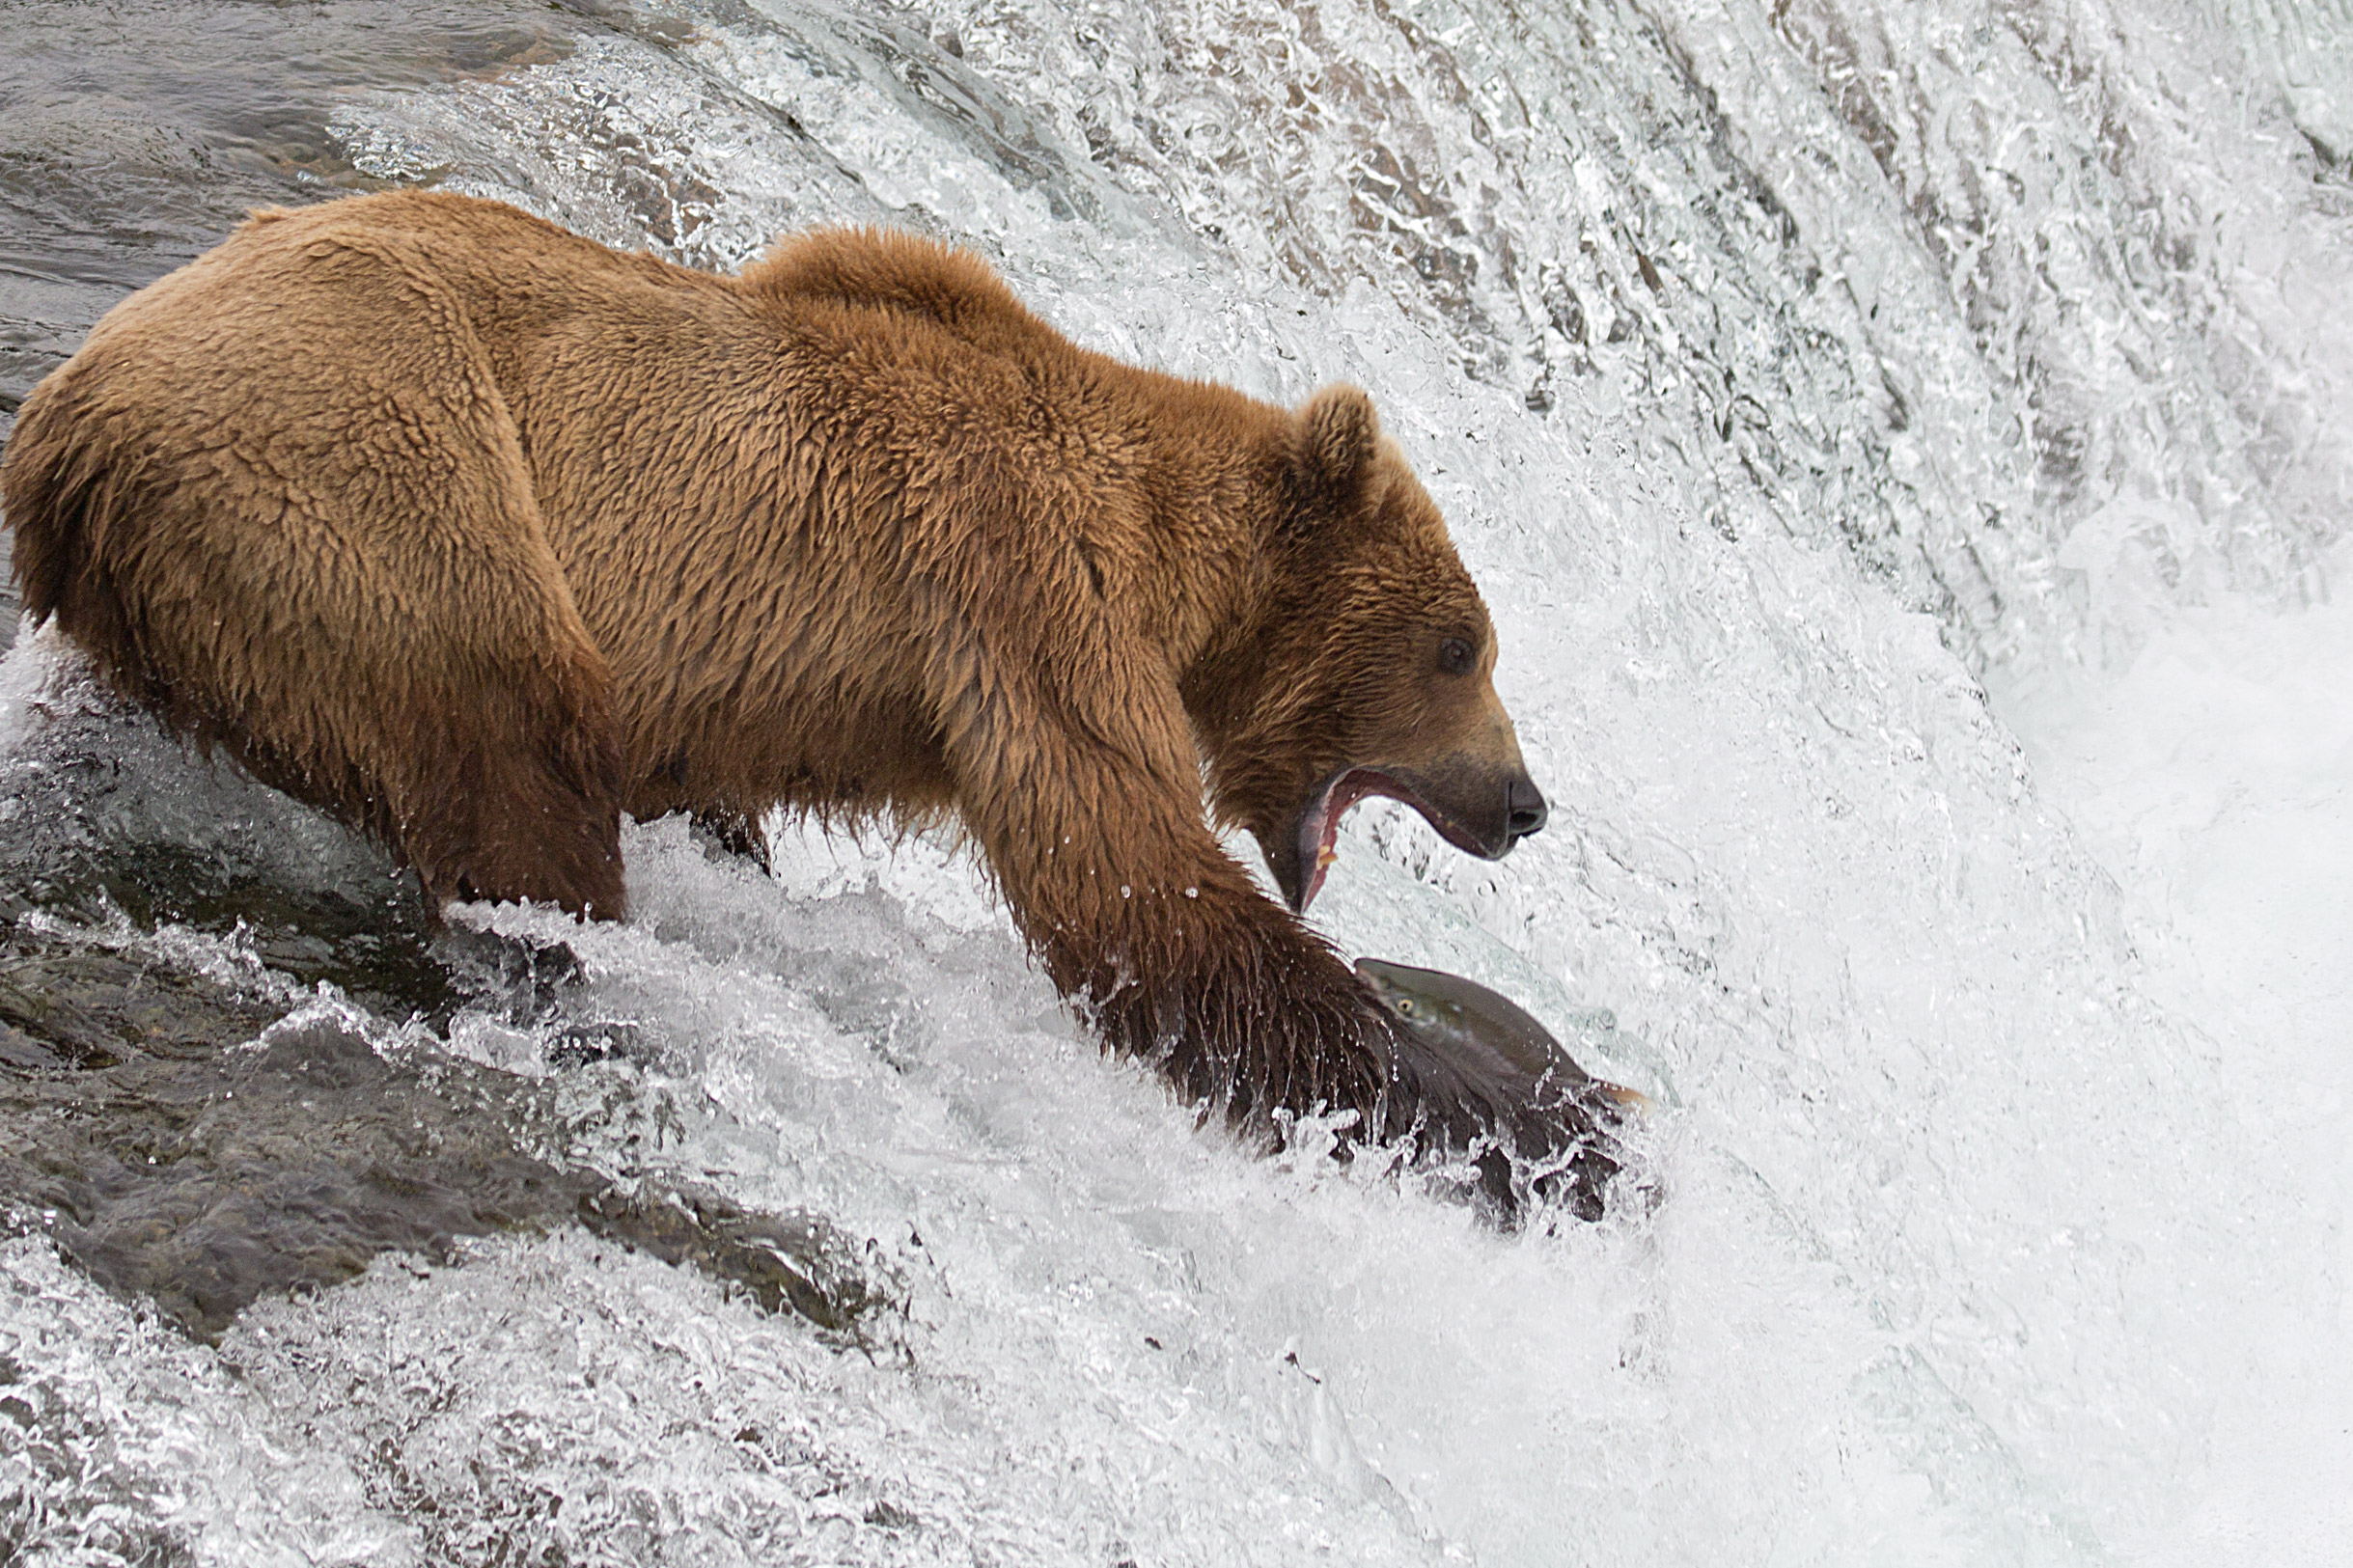 A Large Brown Bear Catching Salmon